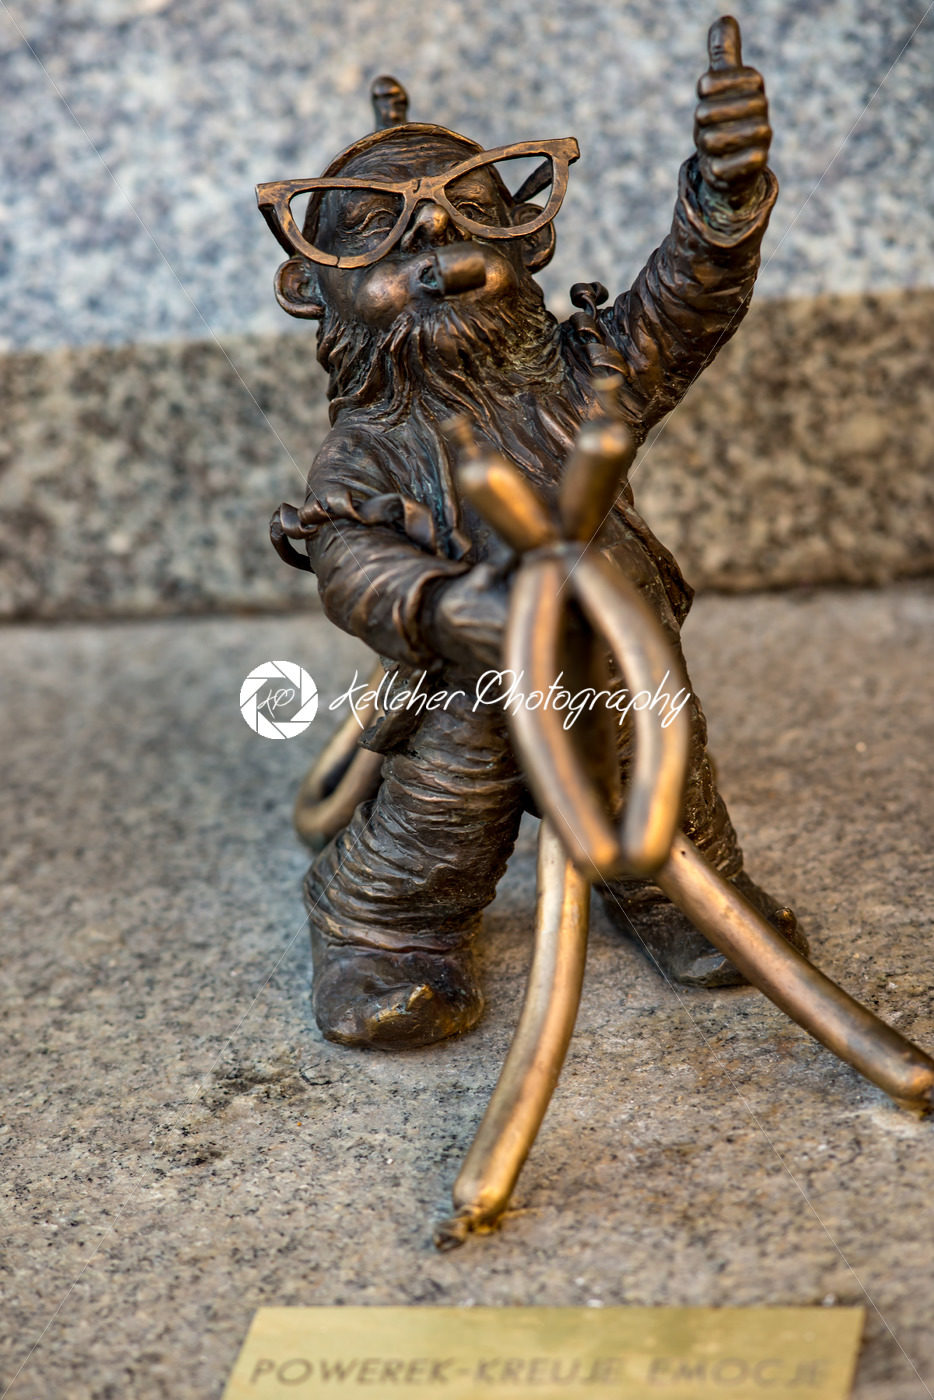 Wroclaw, Poland – March 9, 2018: Wroclaw, a miniature statue of a gnome on the main square of the city. - Kelleher Photography Store